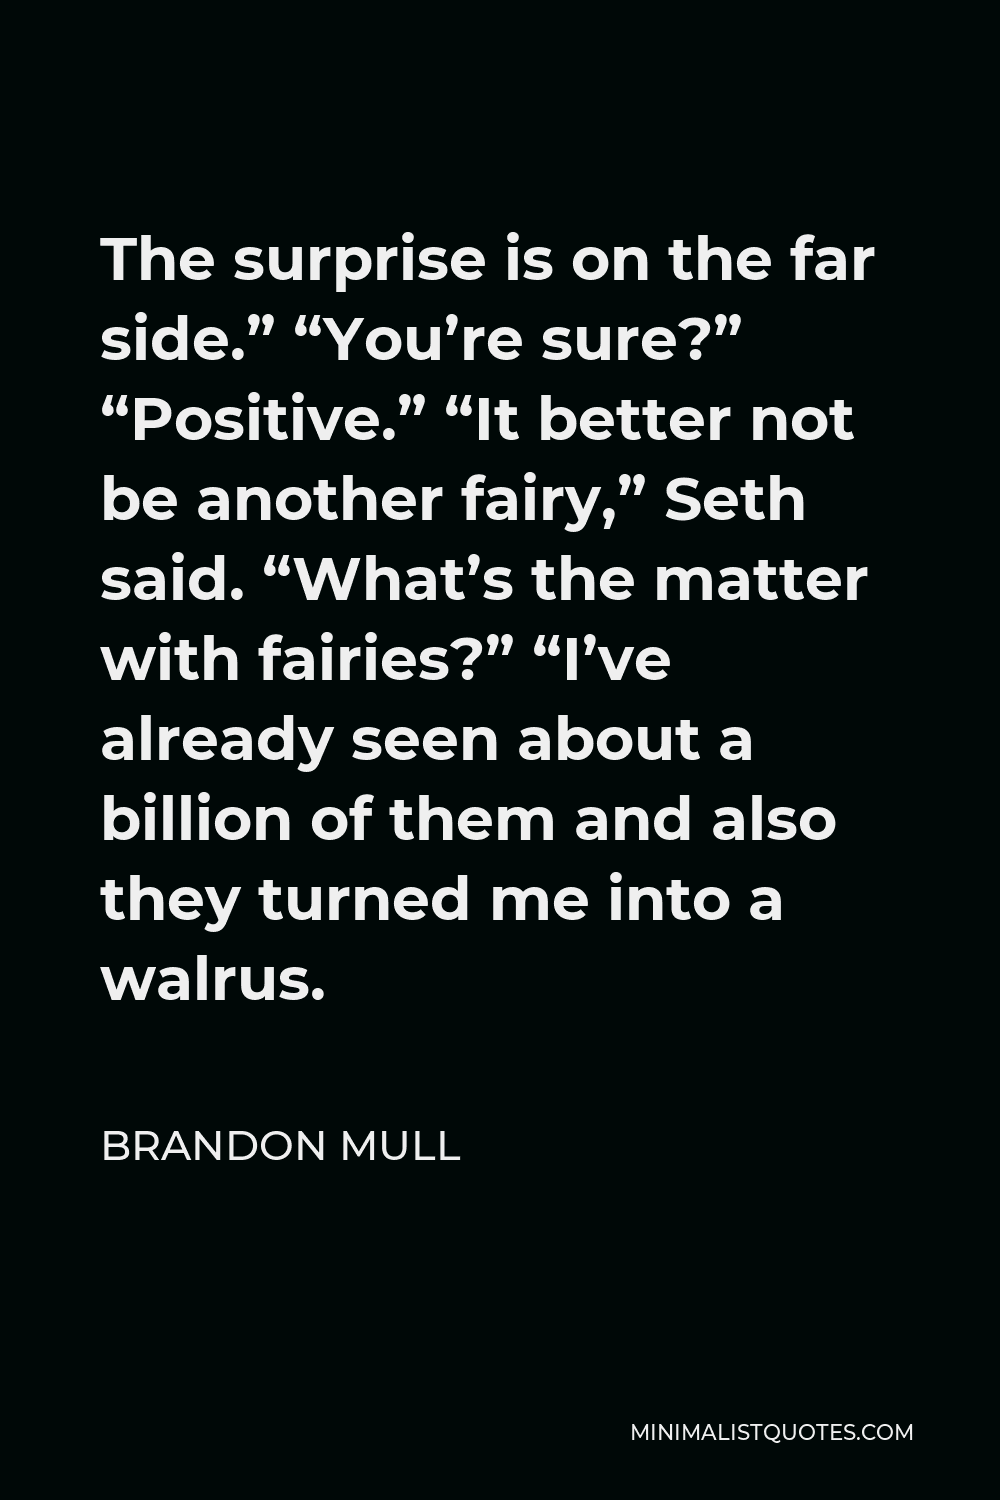 Brandon Mull Quote - The surprise is on the far side.” “You’re sure?” “Positive.” “It better not be another fairy,” Seth said. “What’s the matter with fairies?” “I’ve already seen about a billion of them and also they turned me into a walrus.